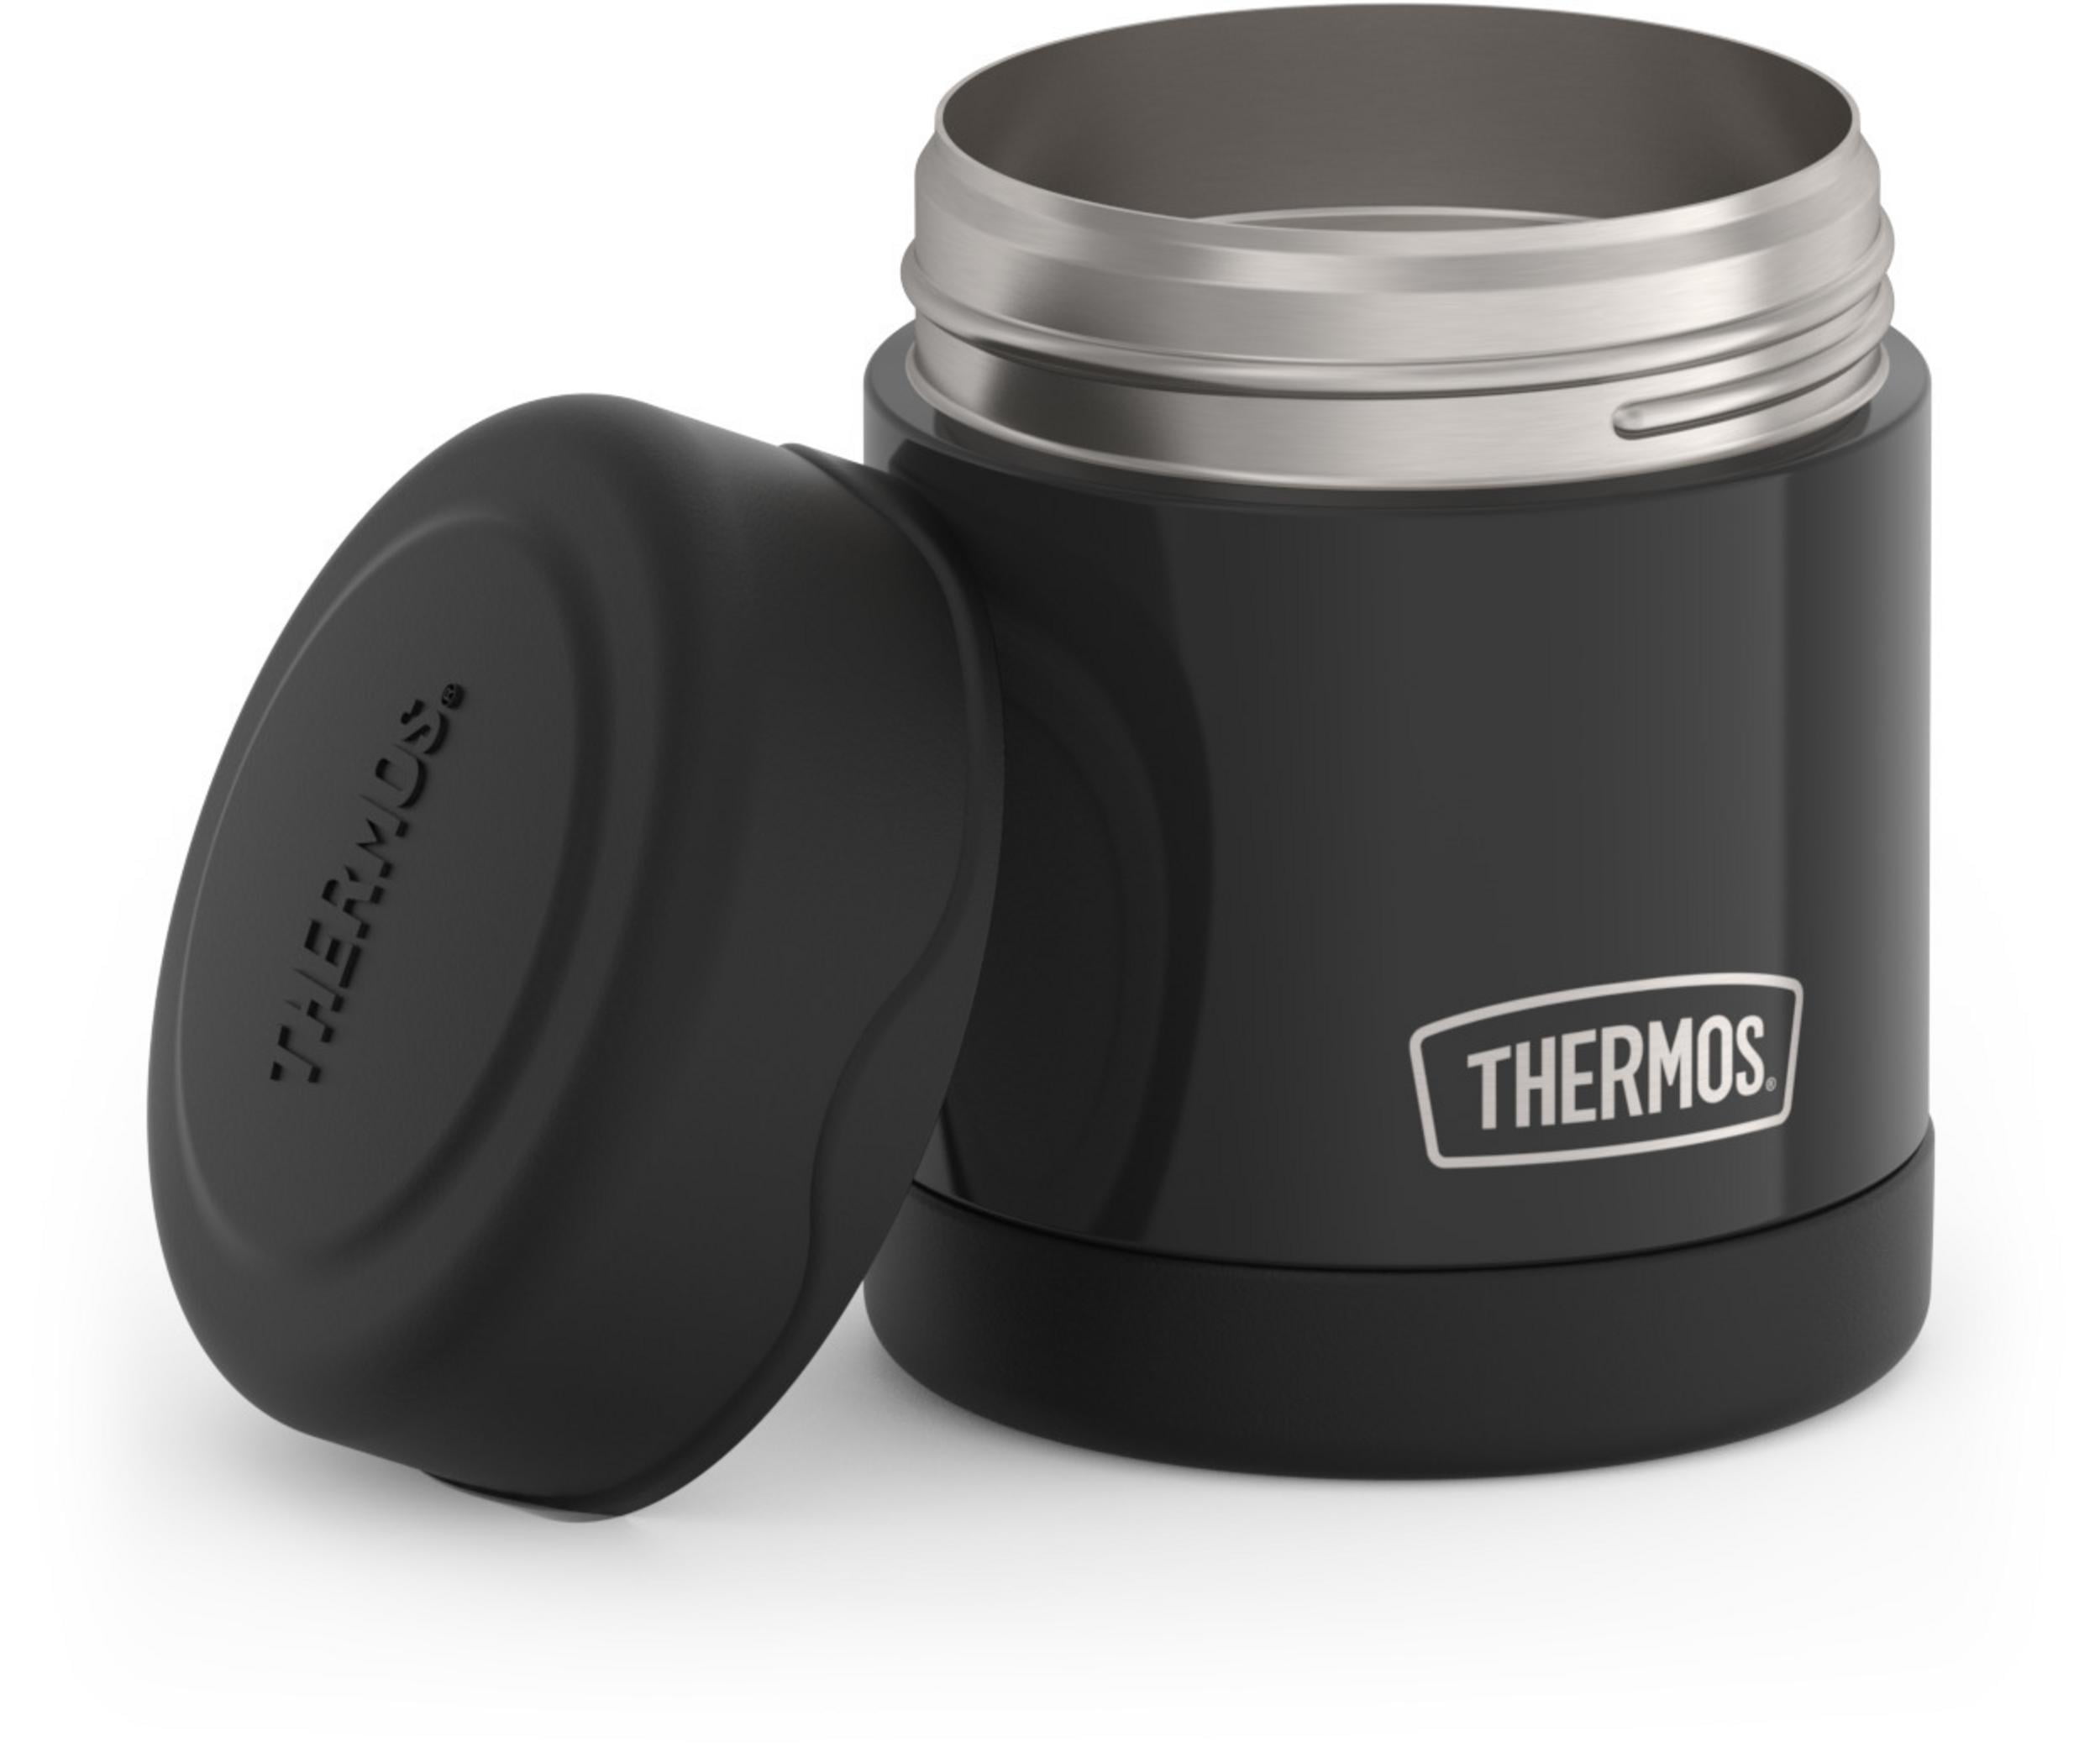 Thermos 10 oz Vacuum Insulated Food Jar, Stainless Steel